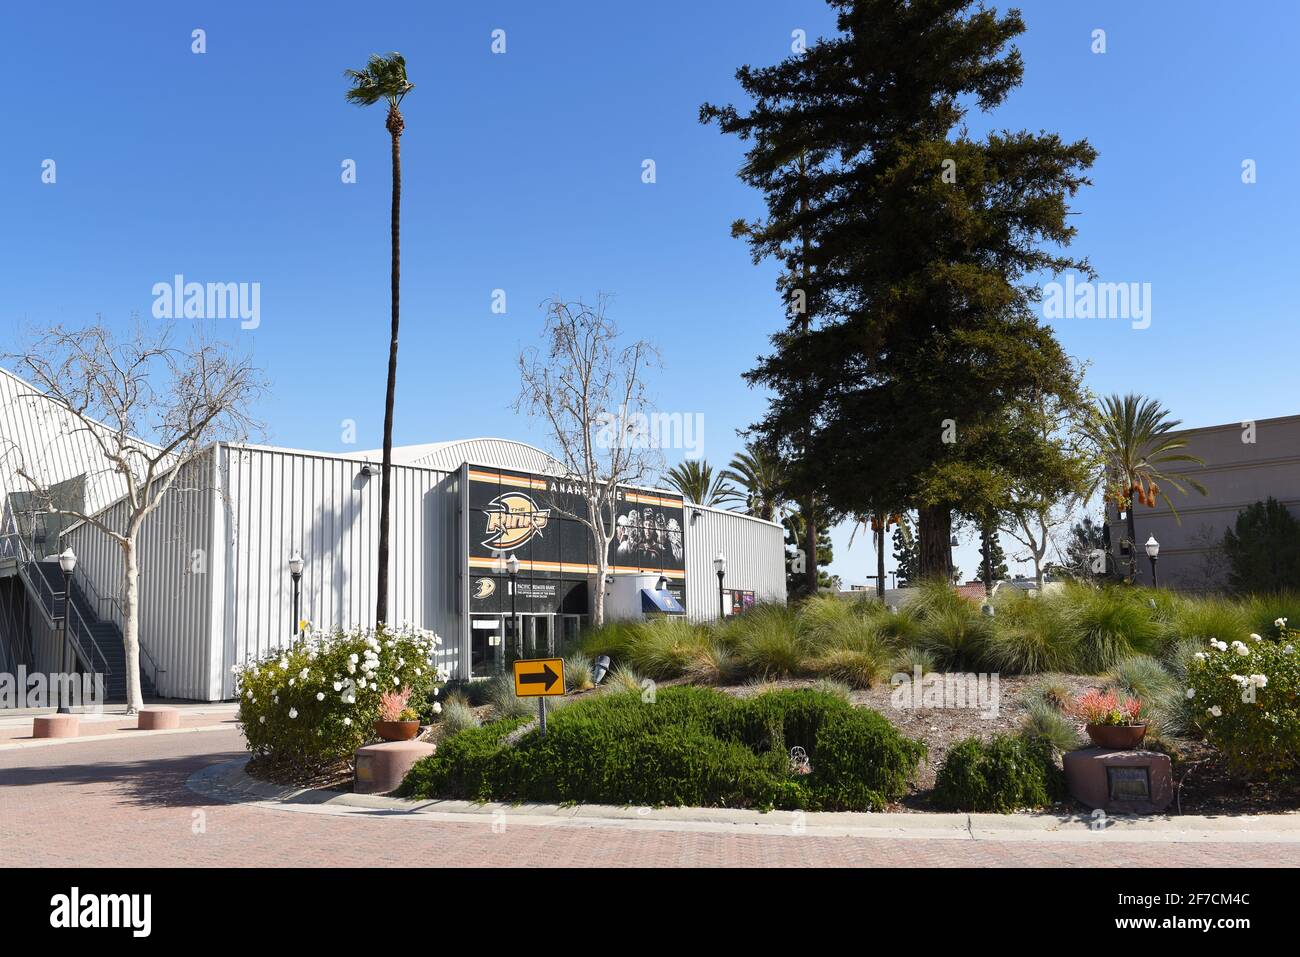 ANAHEIM, CALIFORNIA - 31 MAR 2021: Anaheim Ice is a world class  Ice Hockey and Skating facility and one of the major works of architect Frank Gehry. Stock Photo